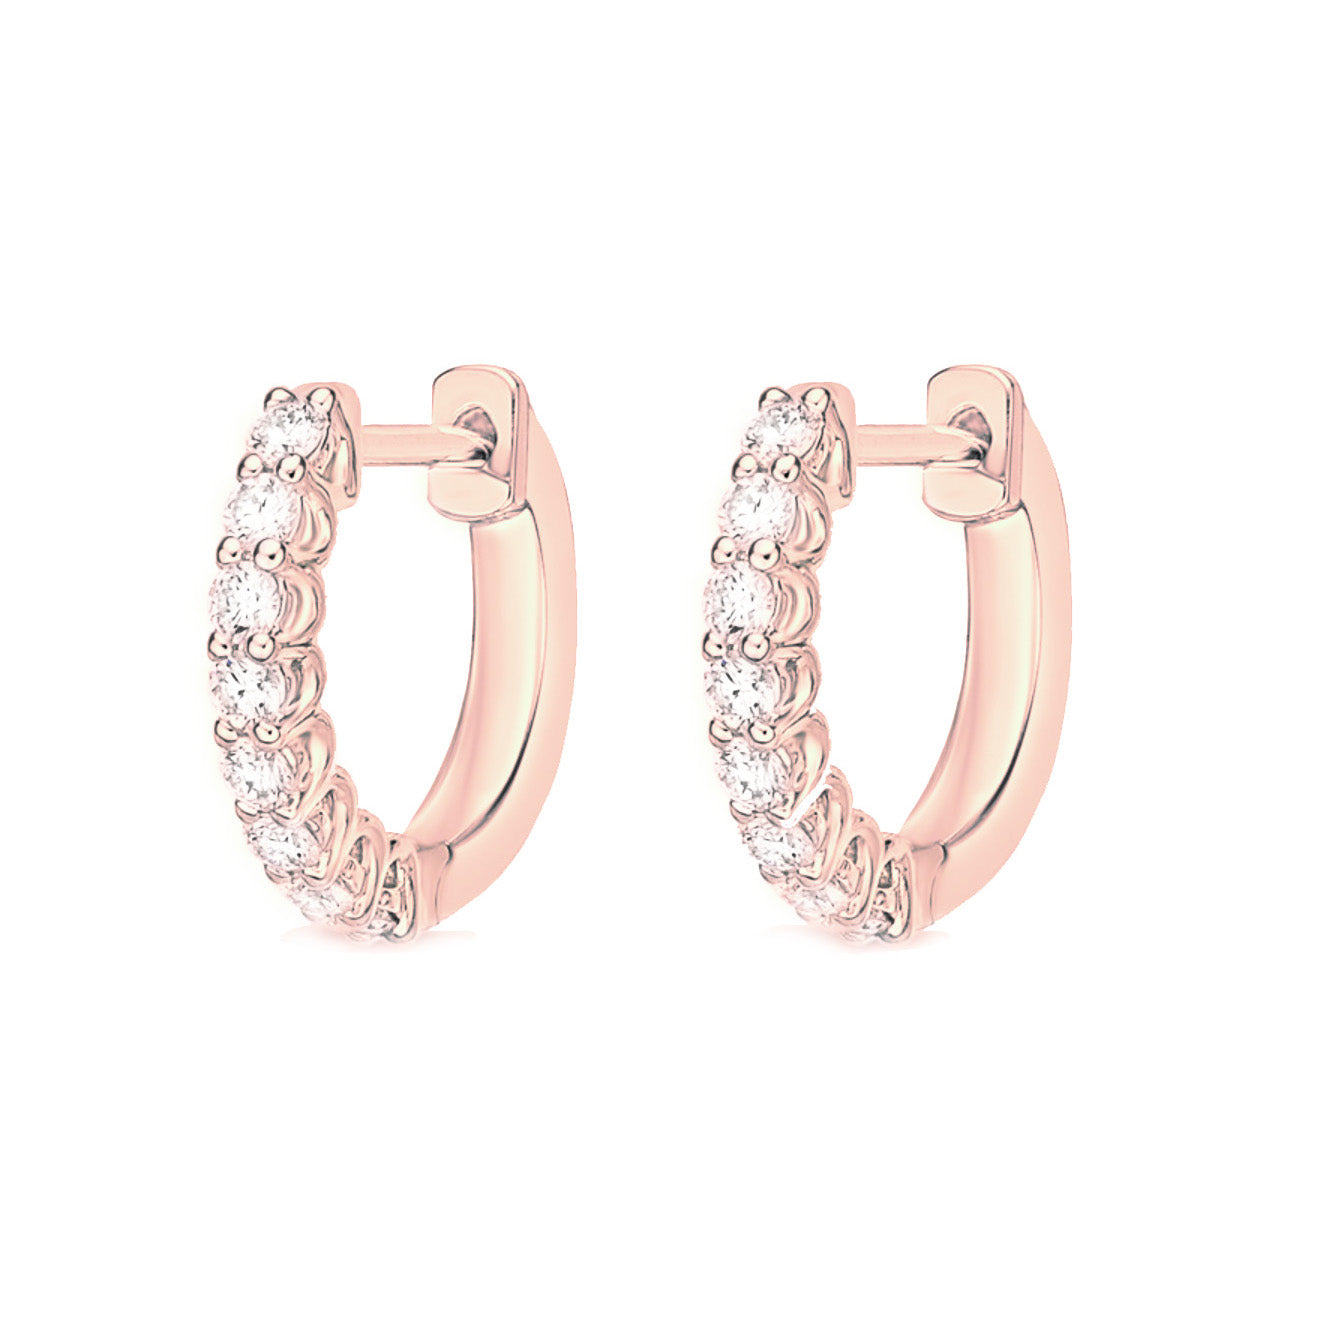 Round Brilliant Cut Diamond Huggie Hoops with Woven Gallery - 12mm - .25ctw